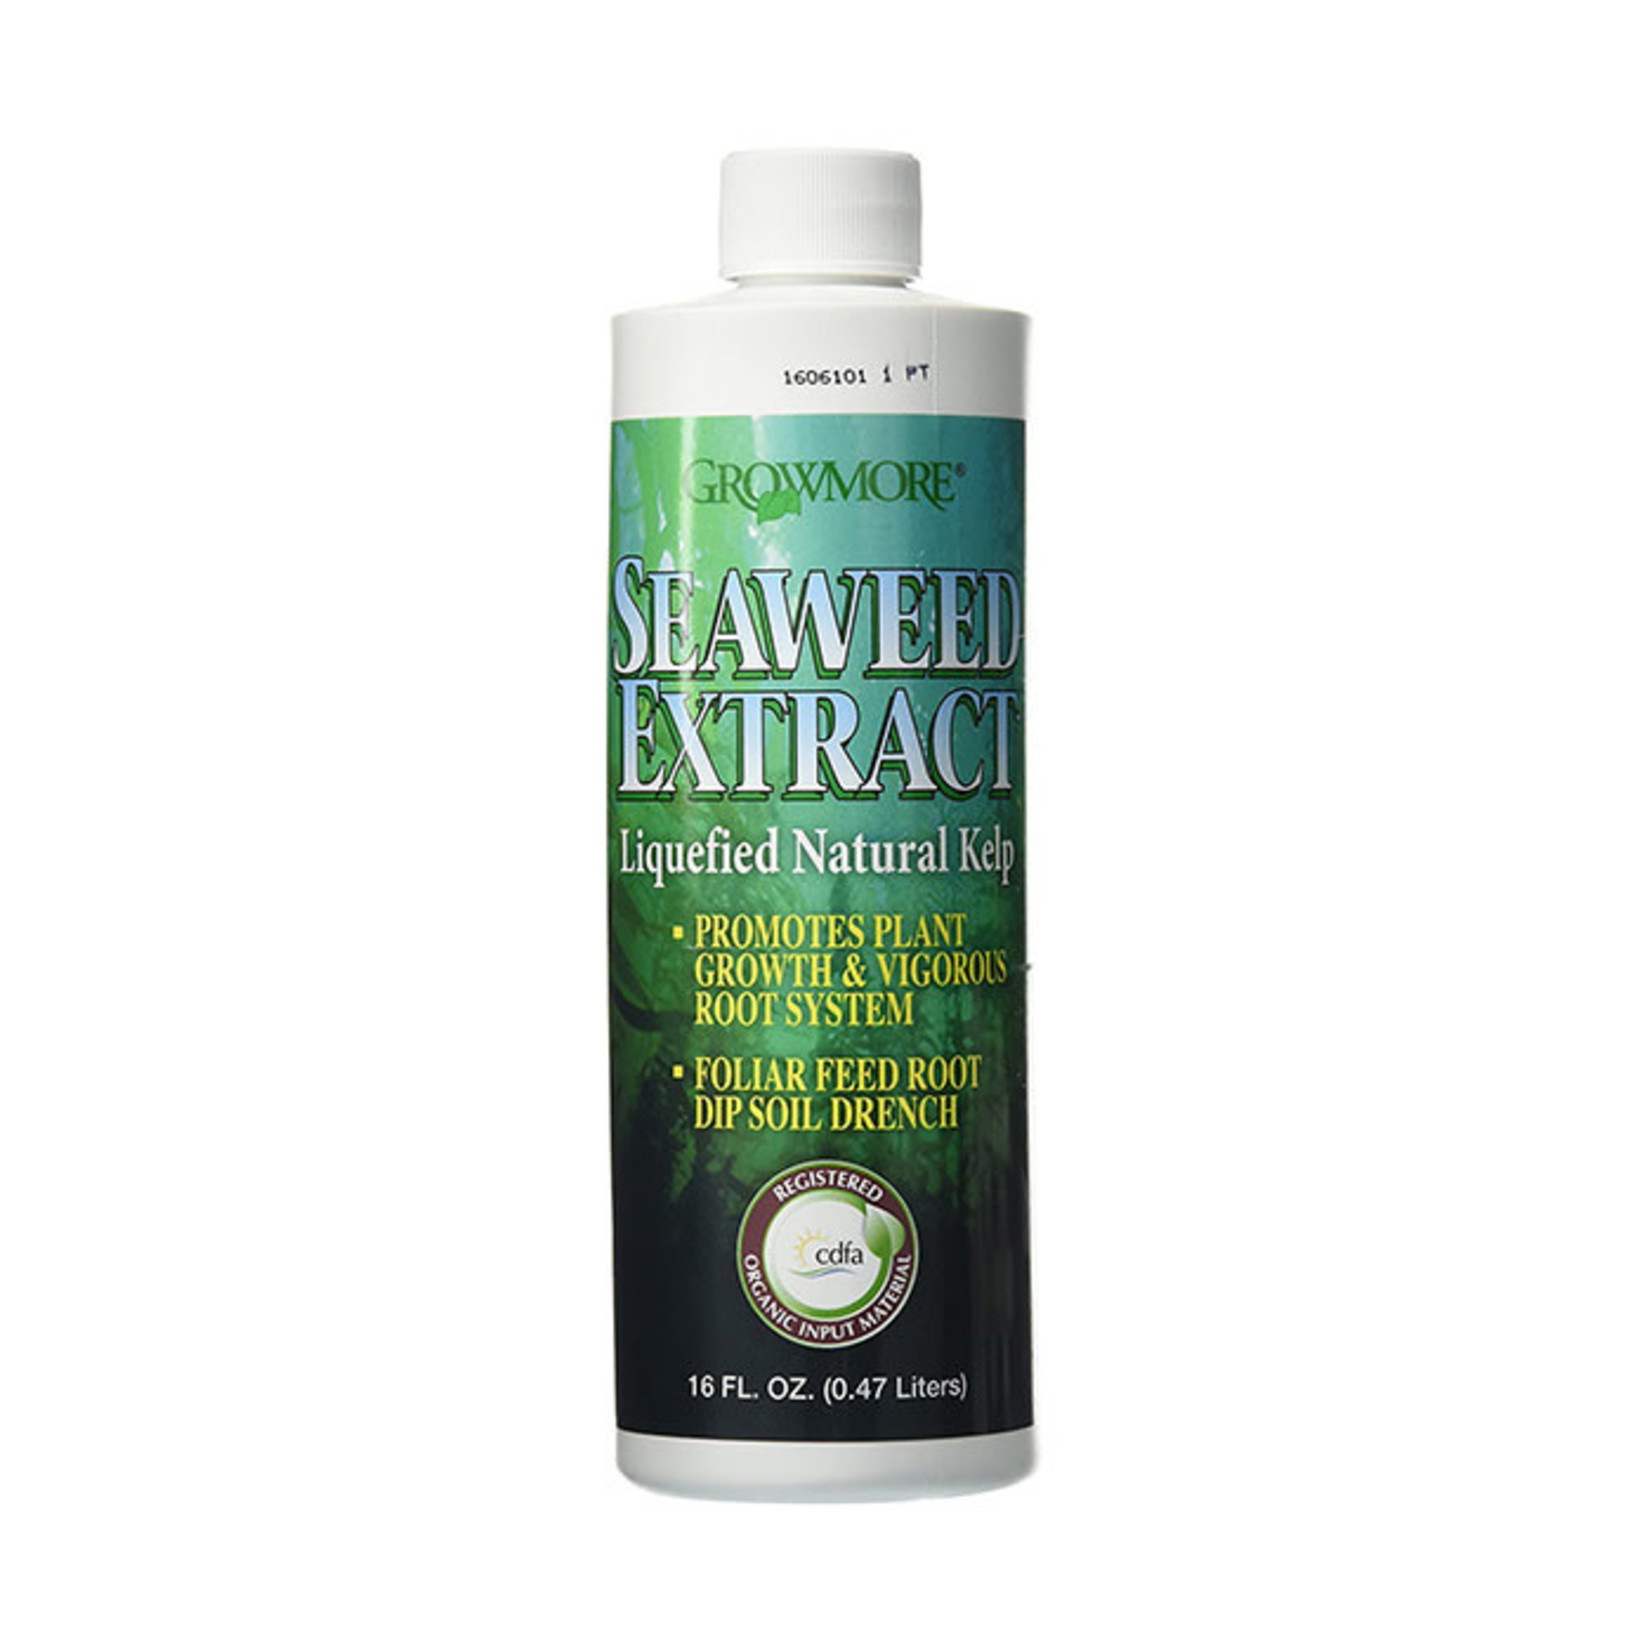 Grow More Seaweed Extract 1 pt